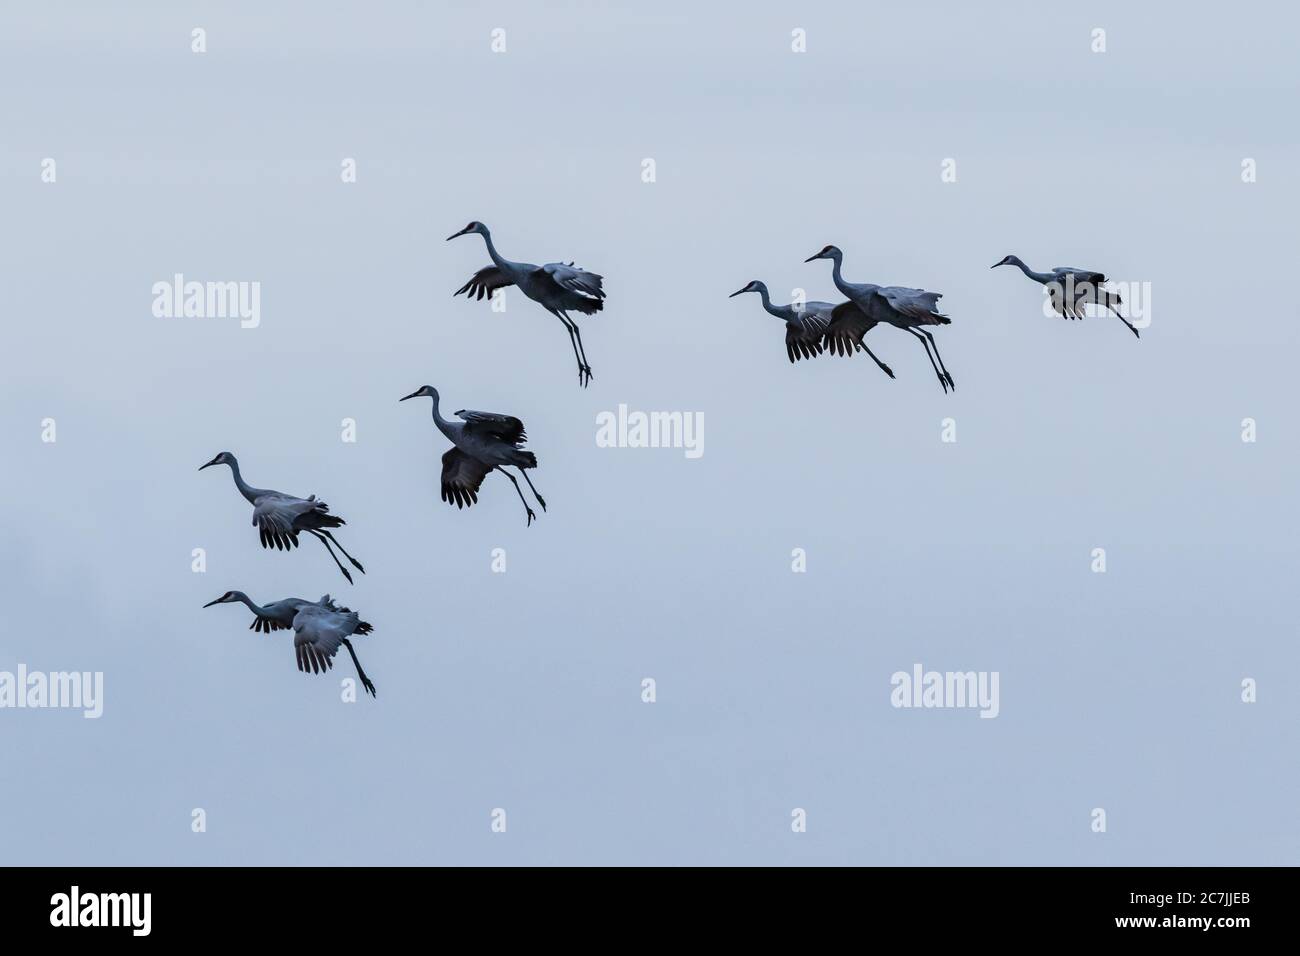 A flock of Sandhill Cranes, Antigone canadensis, drop in for a landing in their very characteristic 'sitting' position with a 'gear down, flaps down' Stock Photo